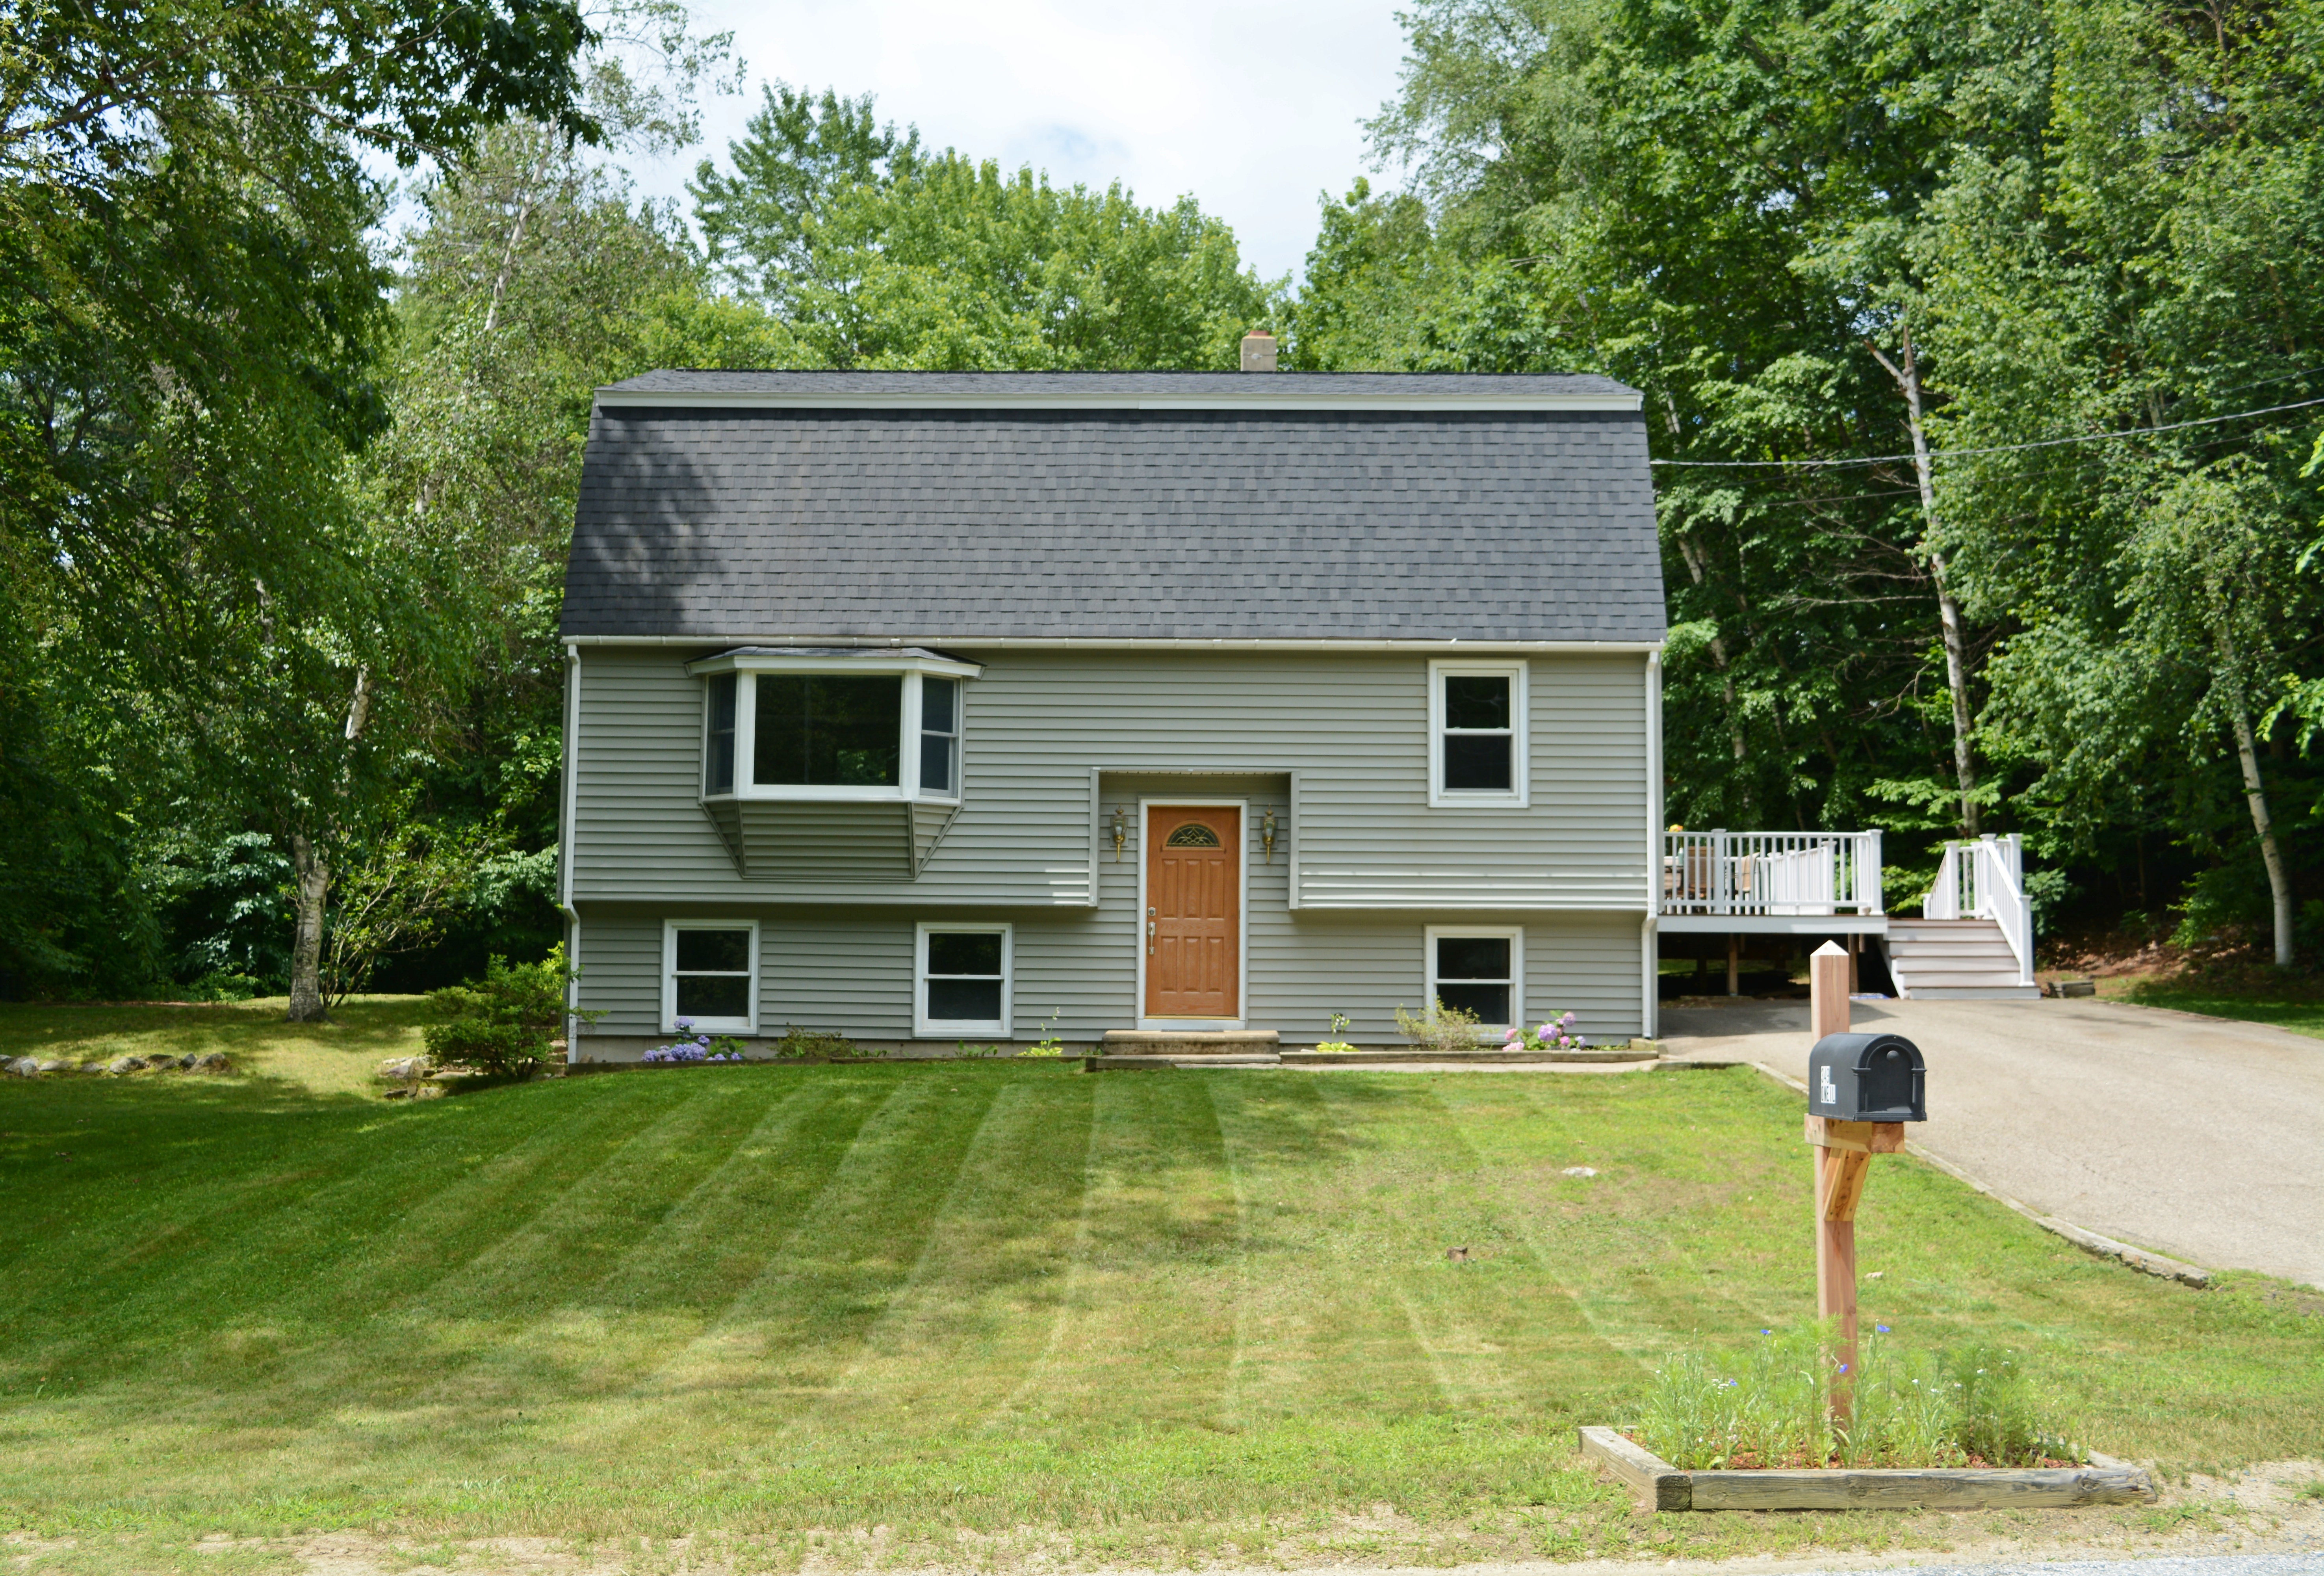 NEWLY-LISTED!!  349 Whittier Dr, Fremont, NH/$372,900